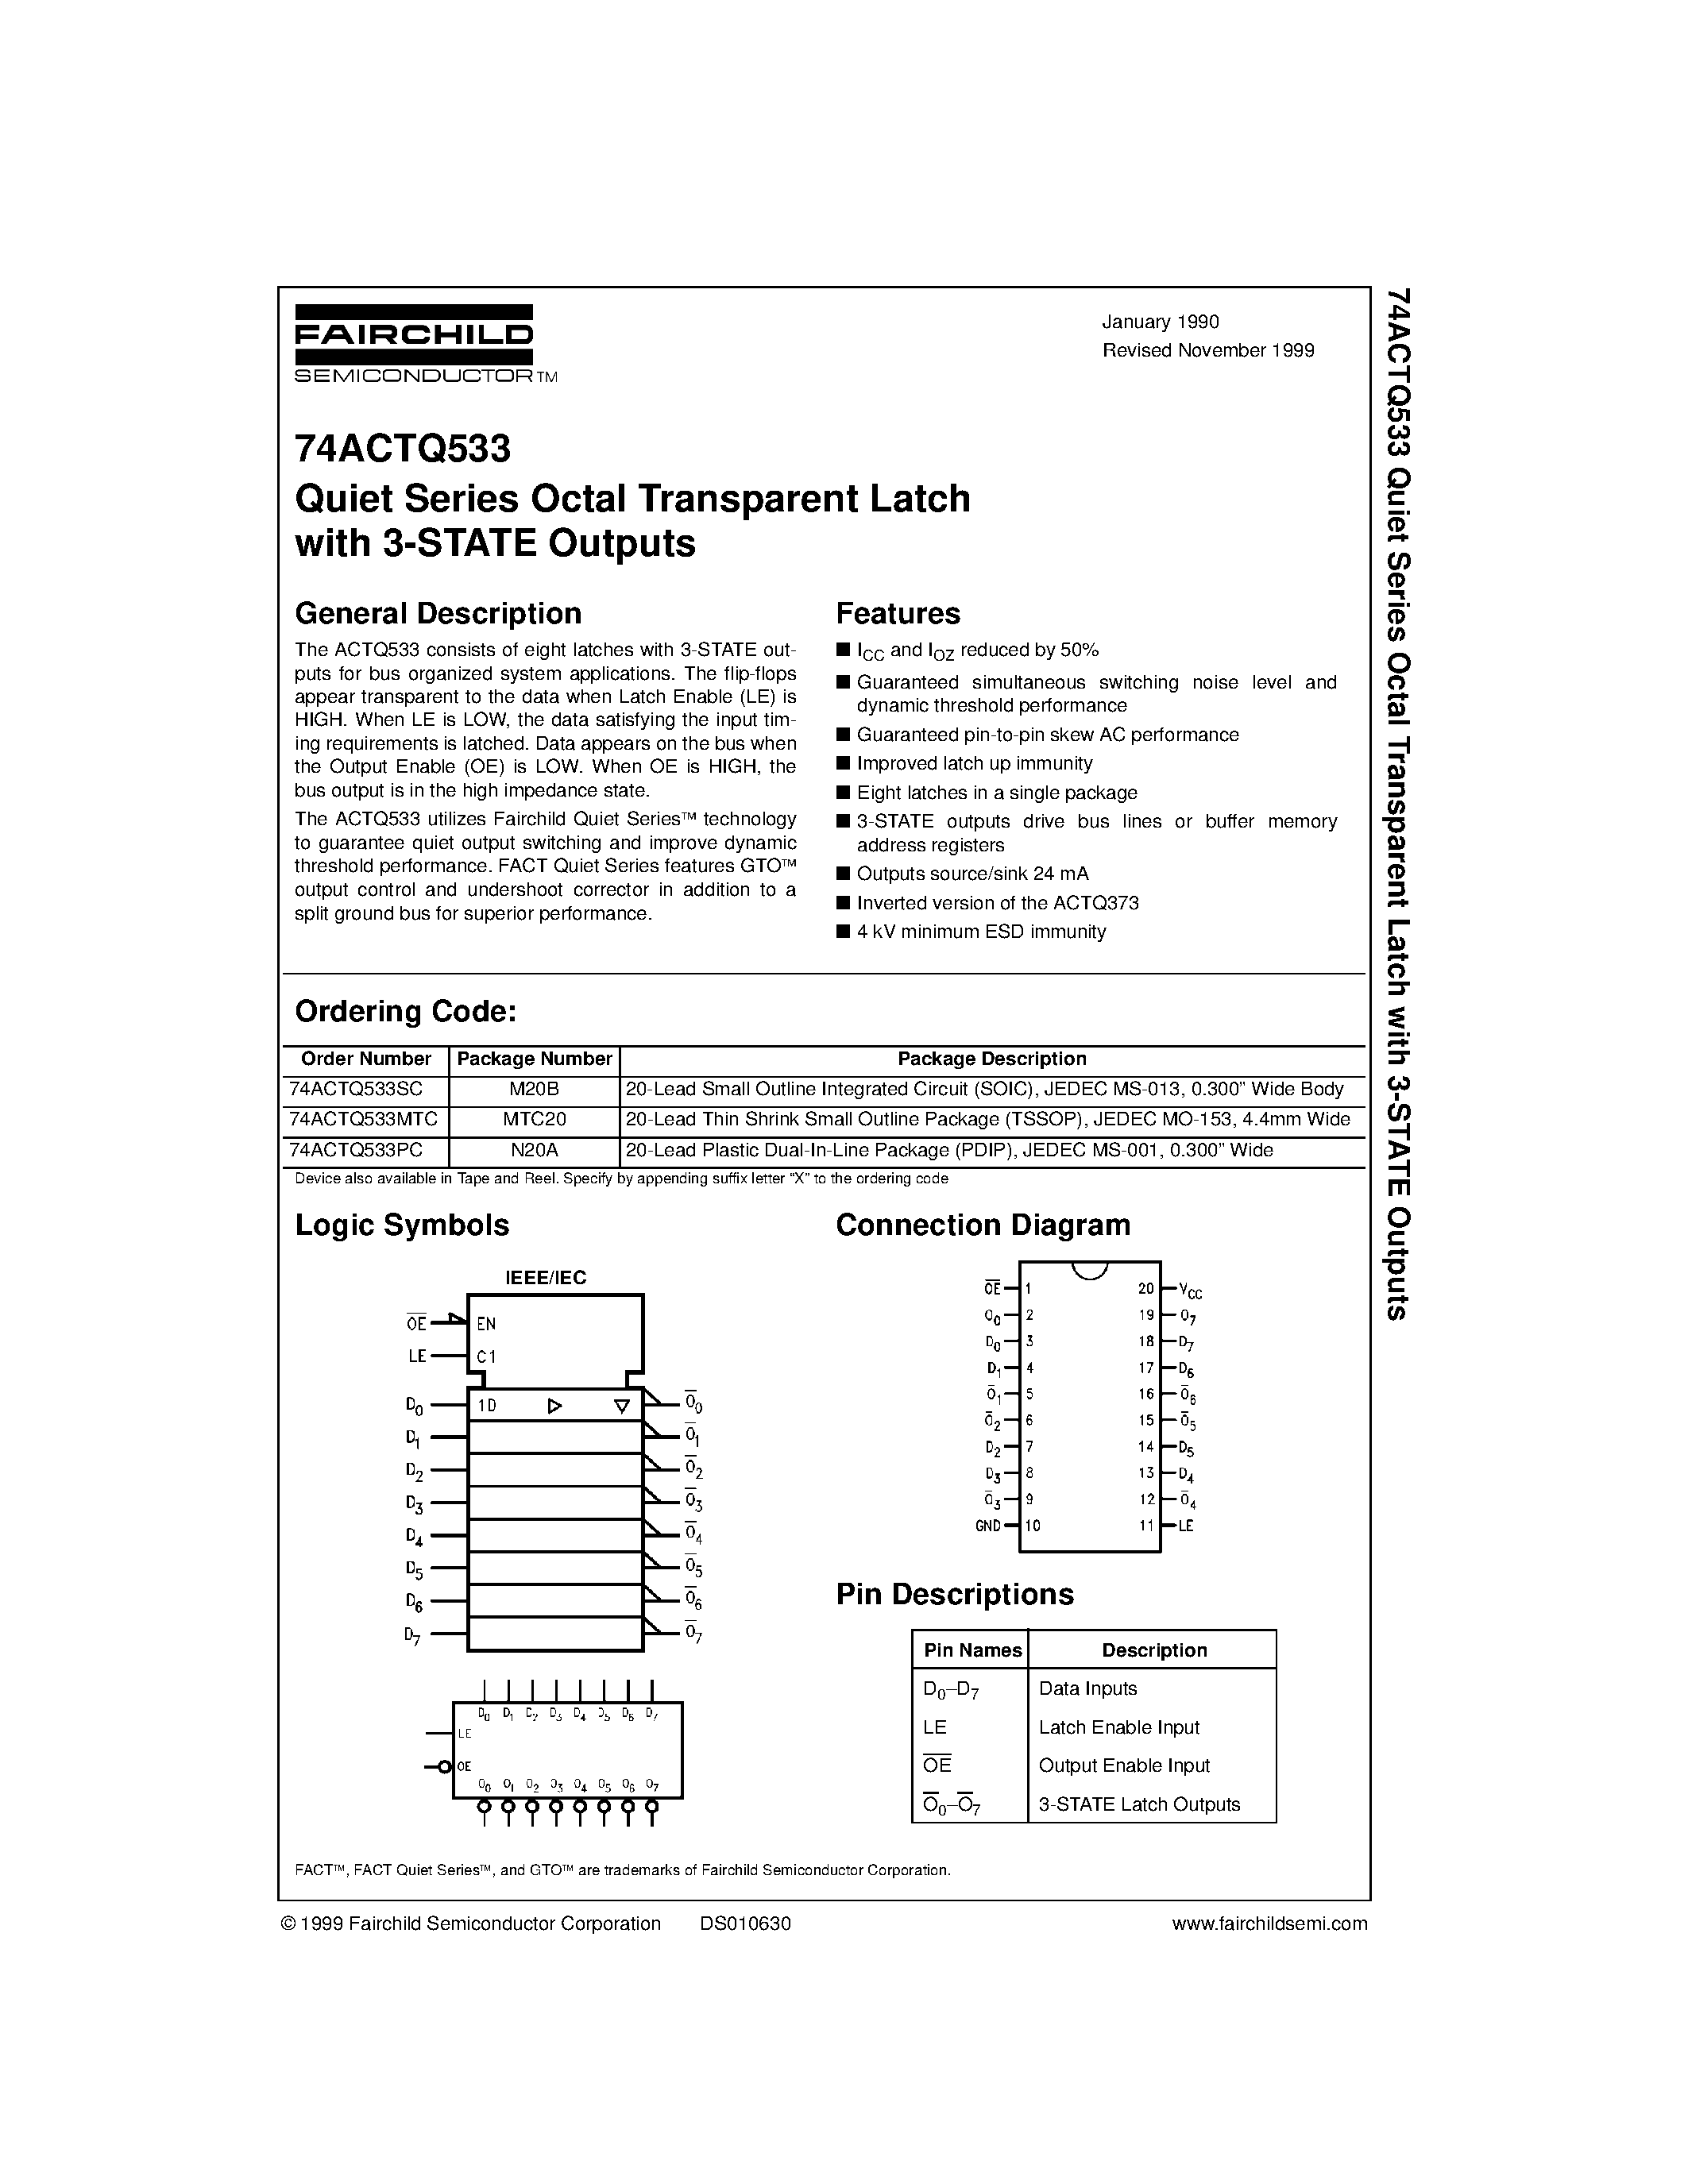 Datasheet 74ACTQ533SC - Quiet Series Octal Transparent Latch with 3-STATE Outputs page 1